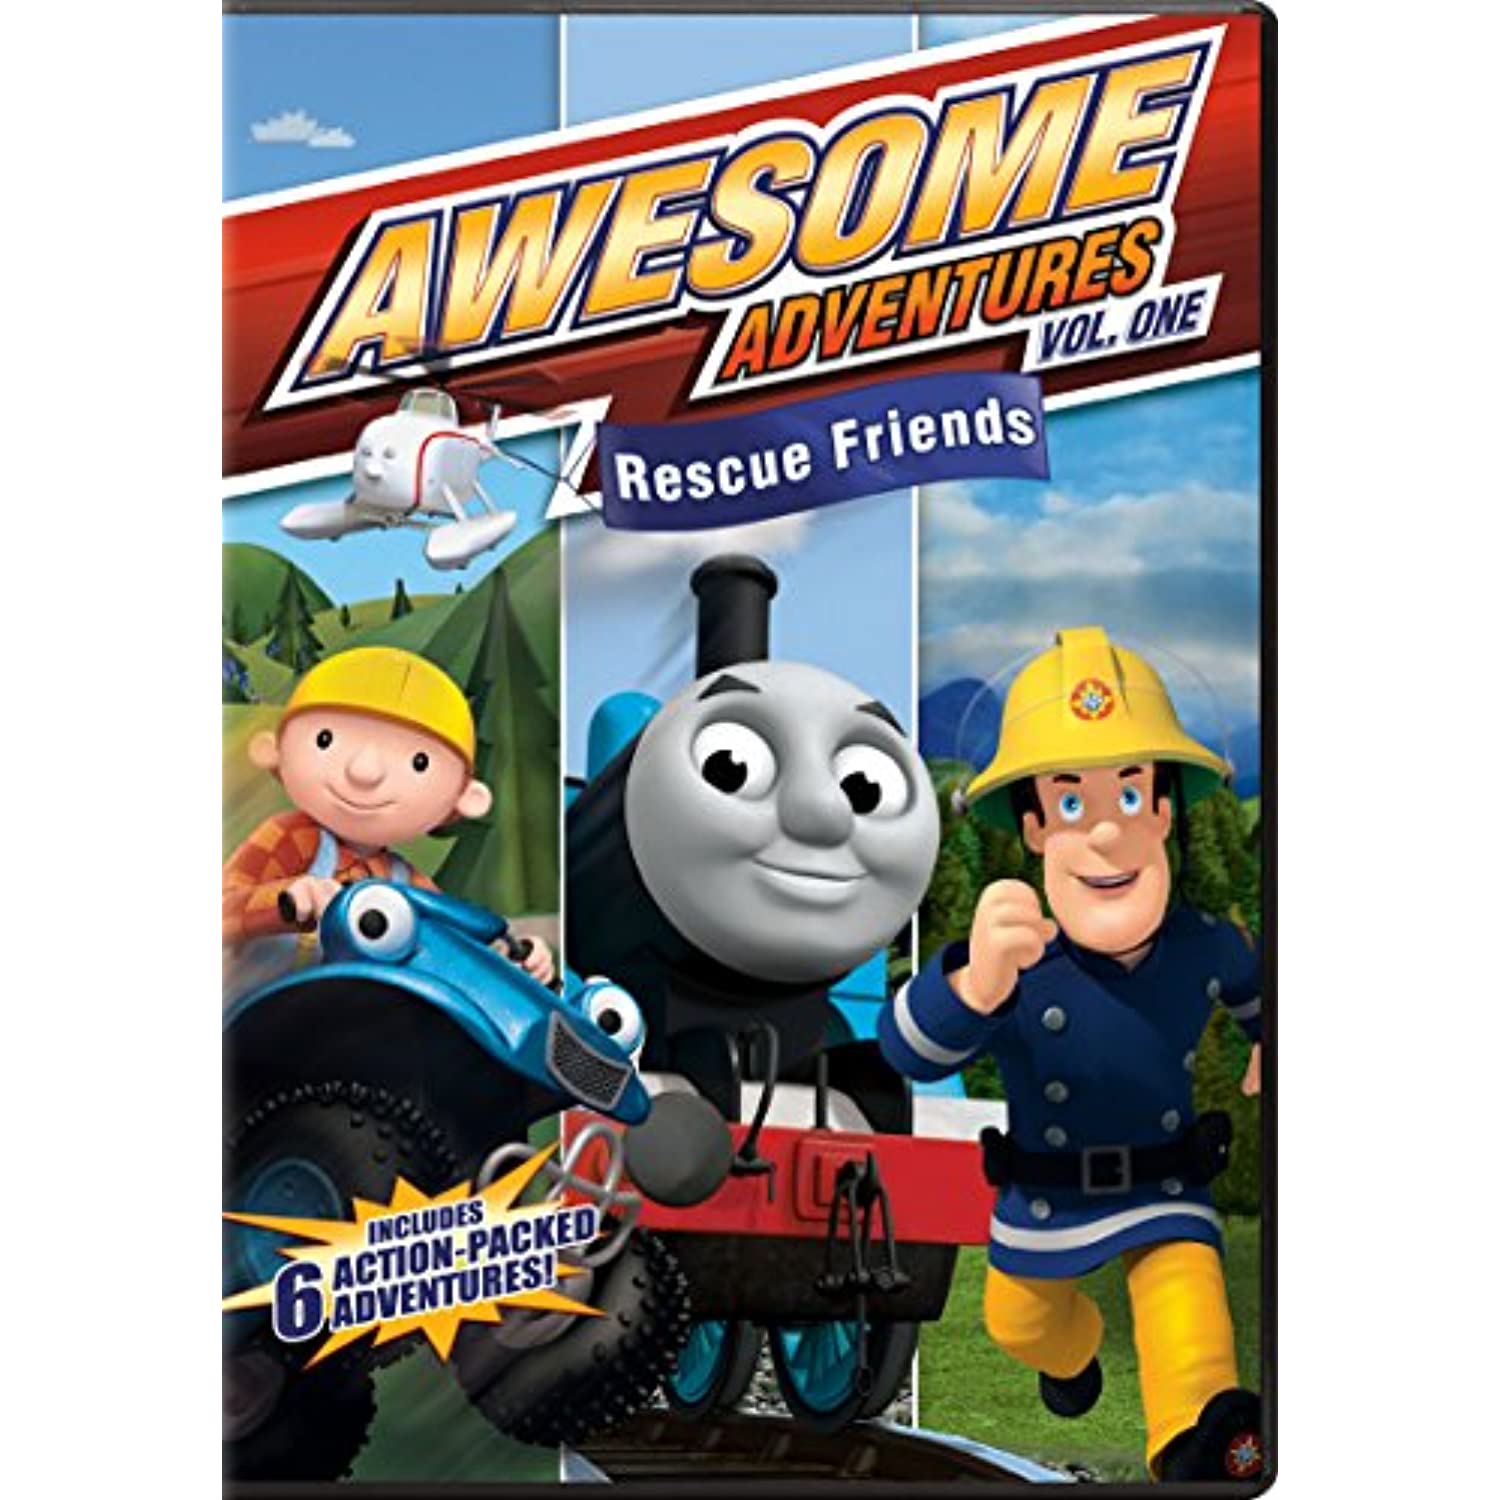 Awesome Adventures Vol. One - Rescue Friends DVD